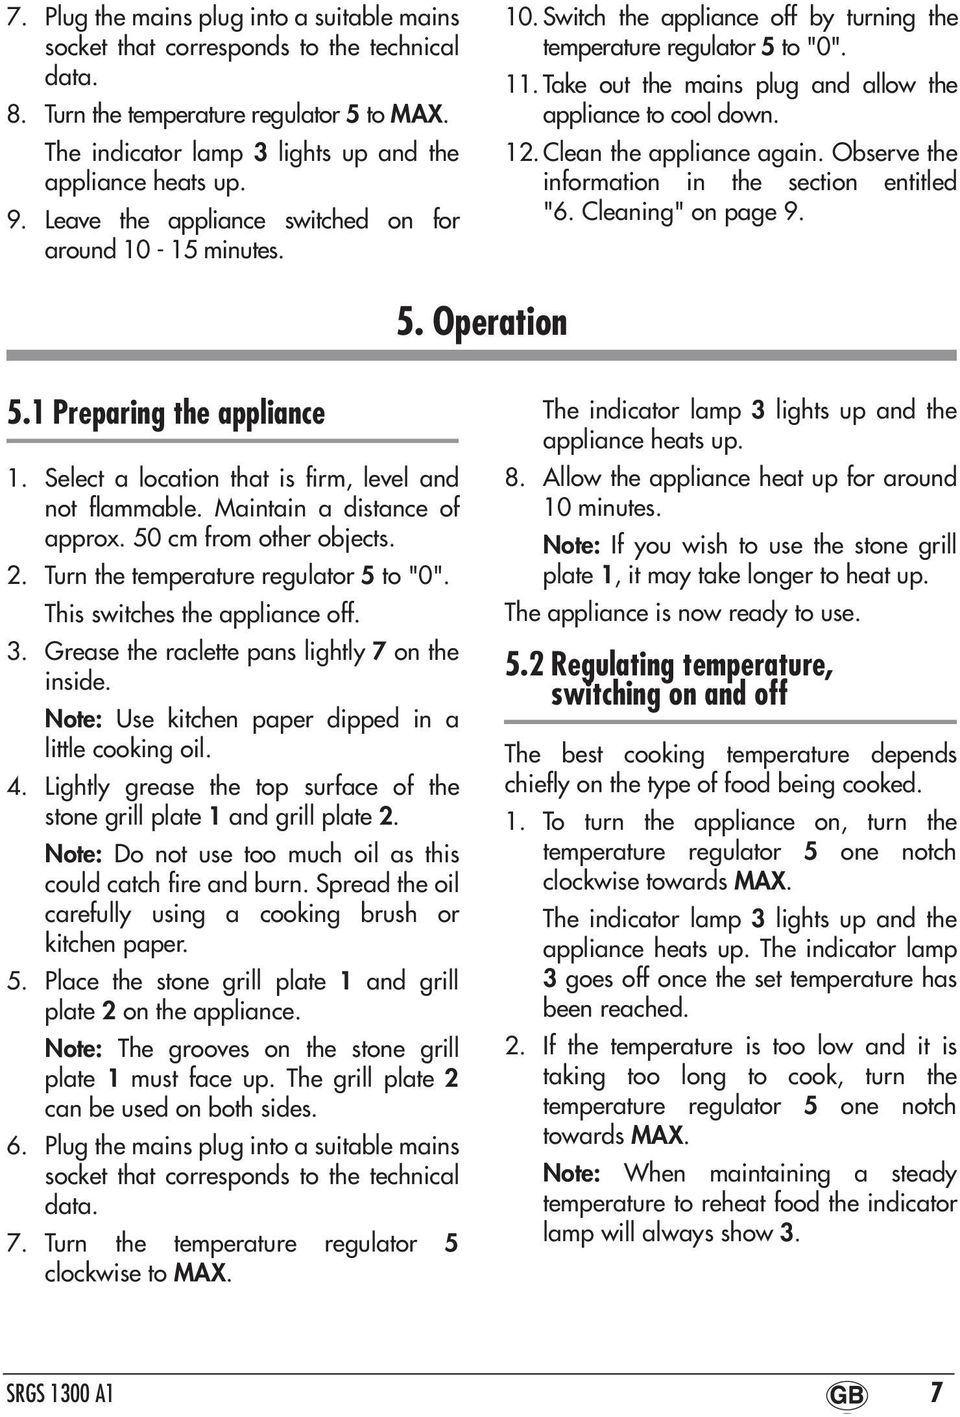 12. Clean the appliance again. Observe the information in the section entitled "6. Cleaning" on page 9. 5. Operation 5.1 Preparing the appliance 1.